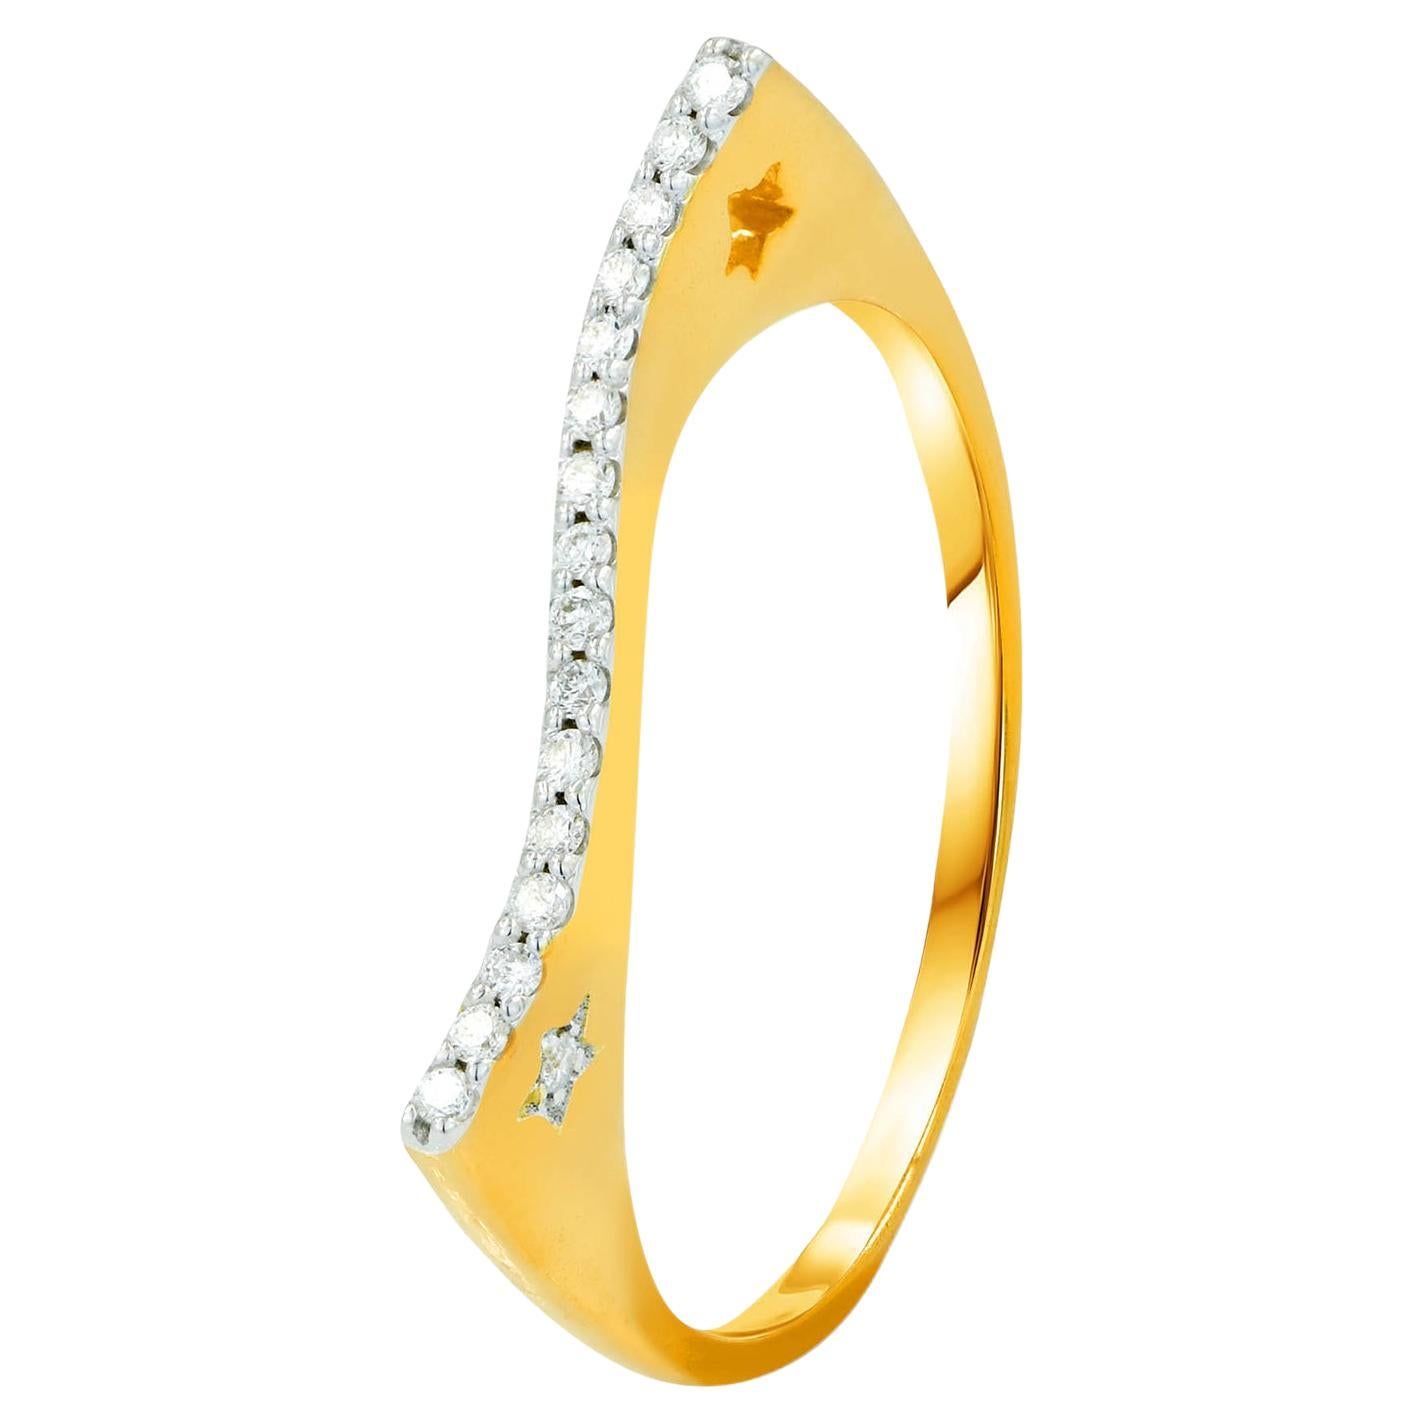 For Sale:  14k Gold Diamond Ring Curved Diamond Ring Thin Minimalist Statement Ring